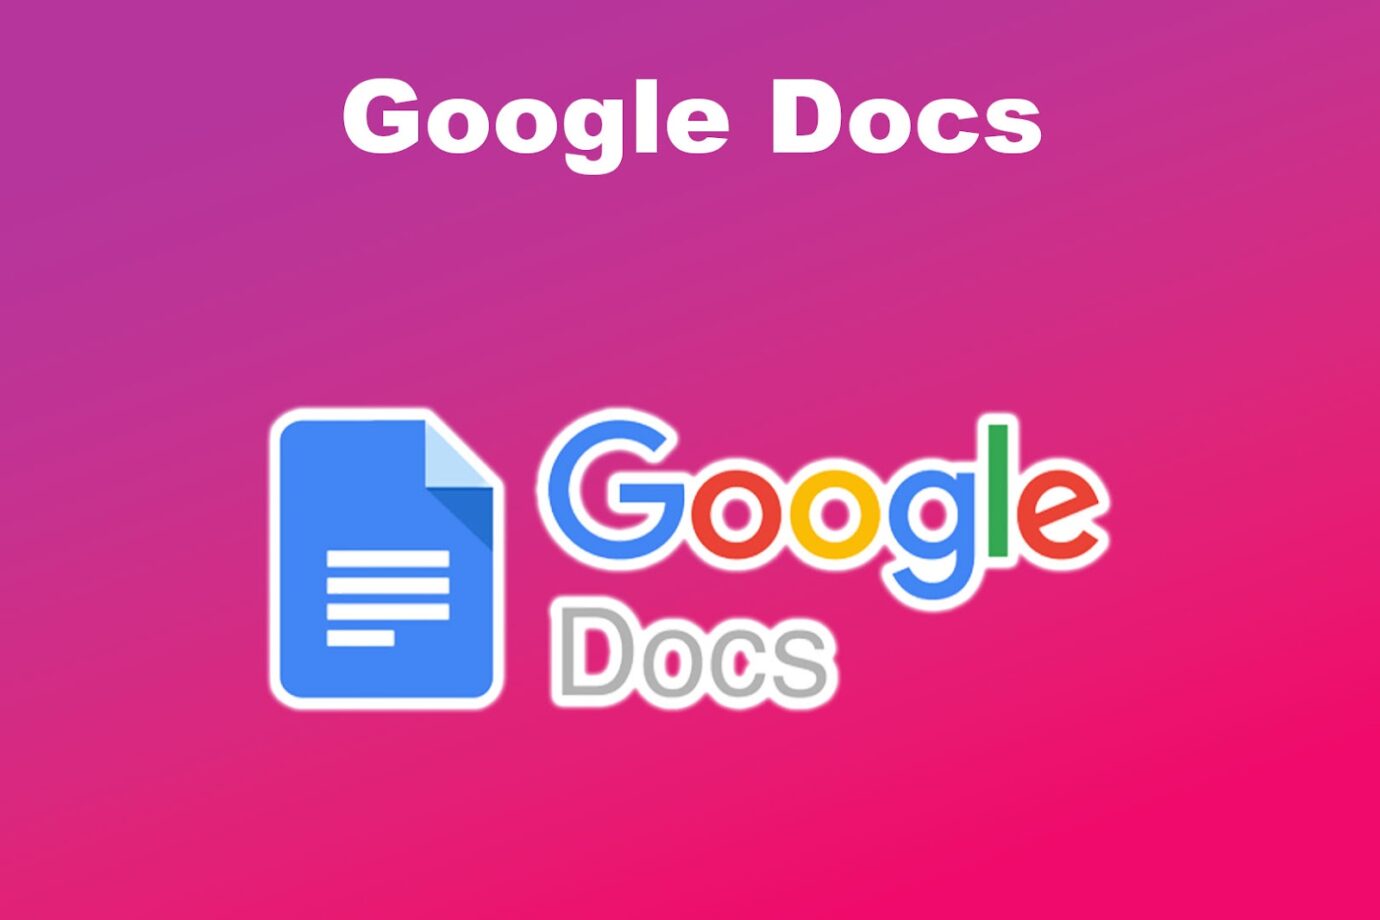 Outsourcing Word Processing Software - Google Docs